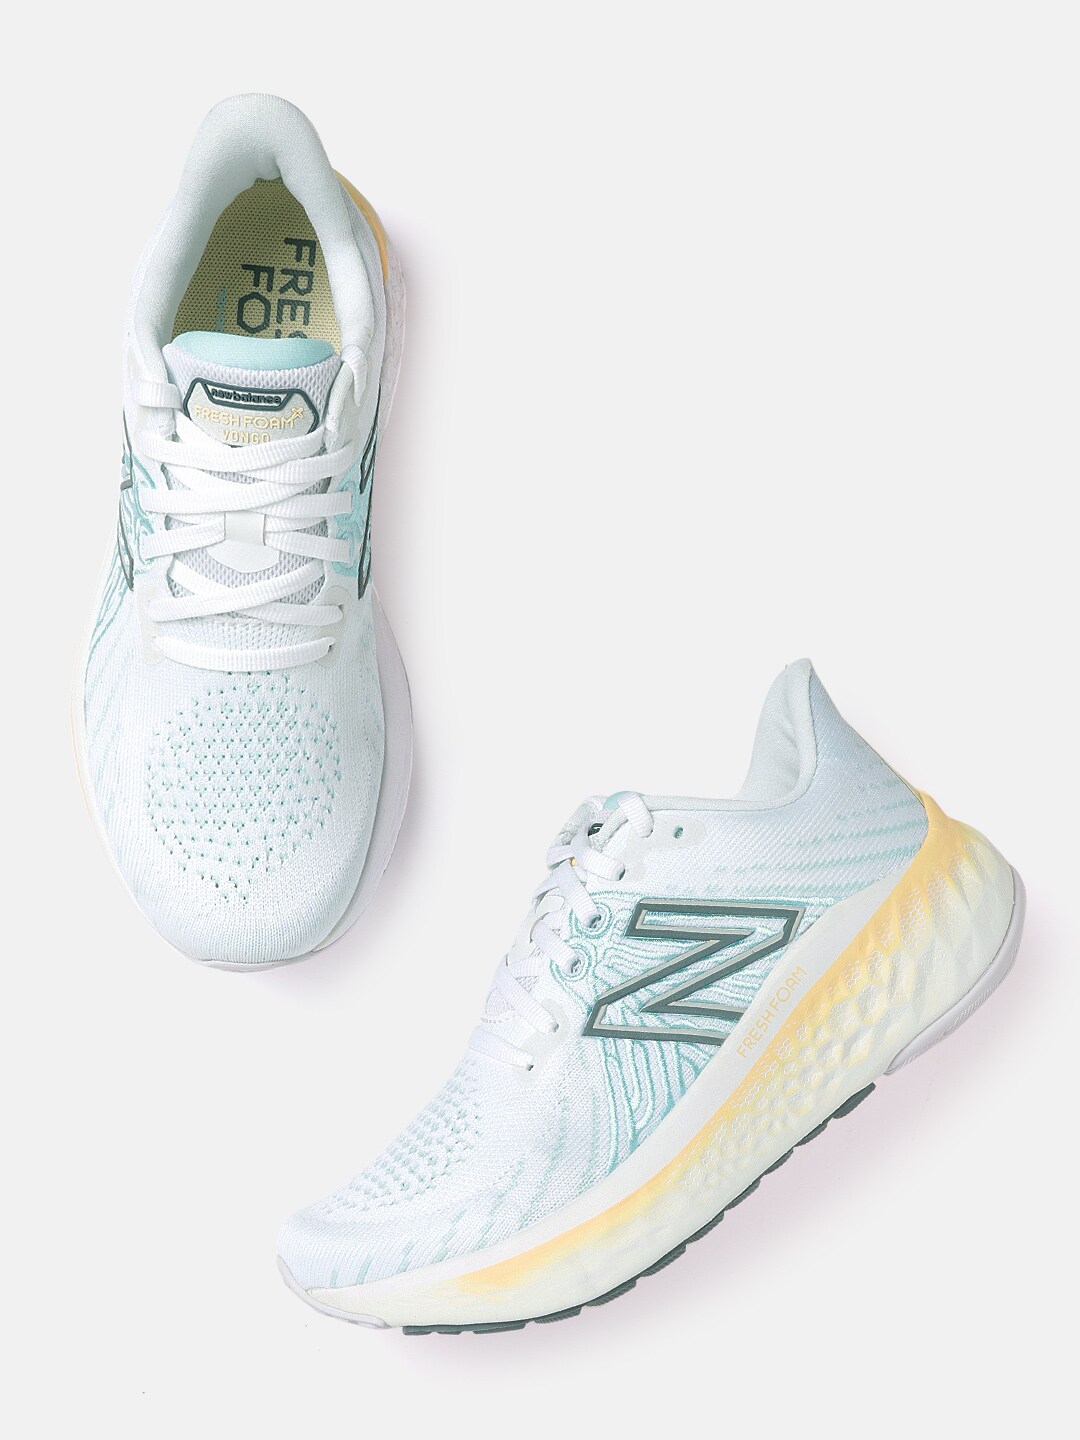 New Balance Women Mint Green & White VONGO Woven Design Running Shoes Price in India